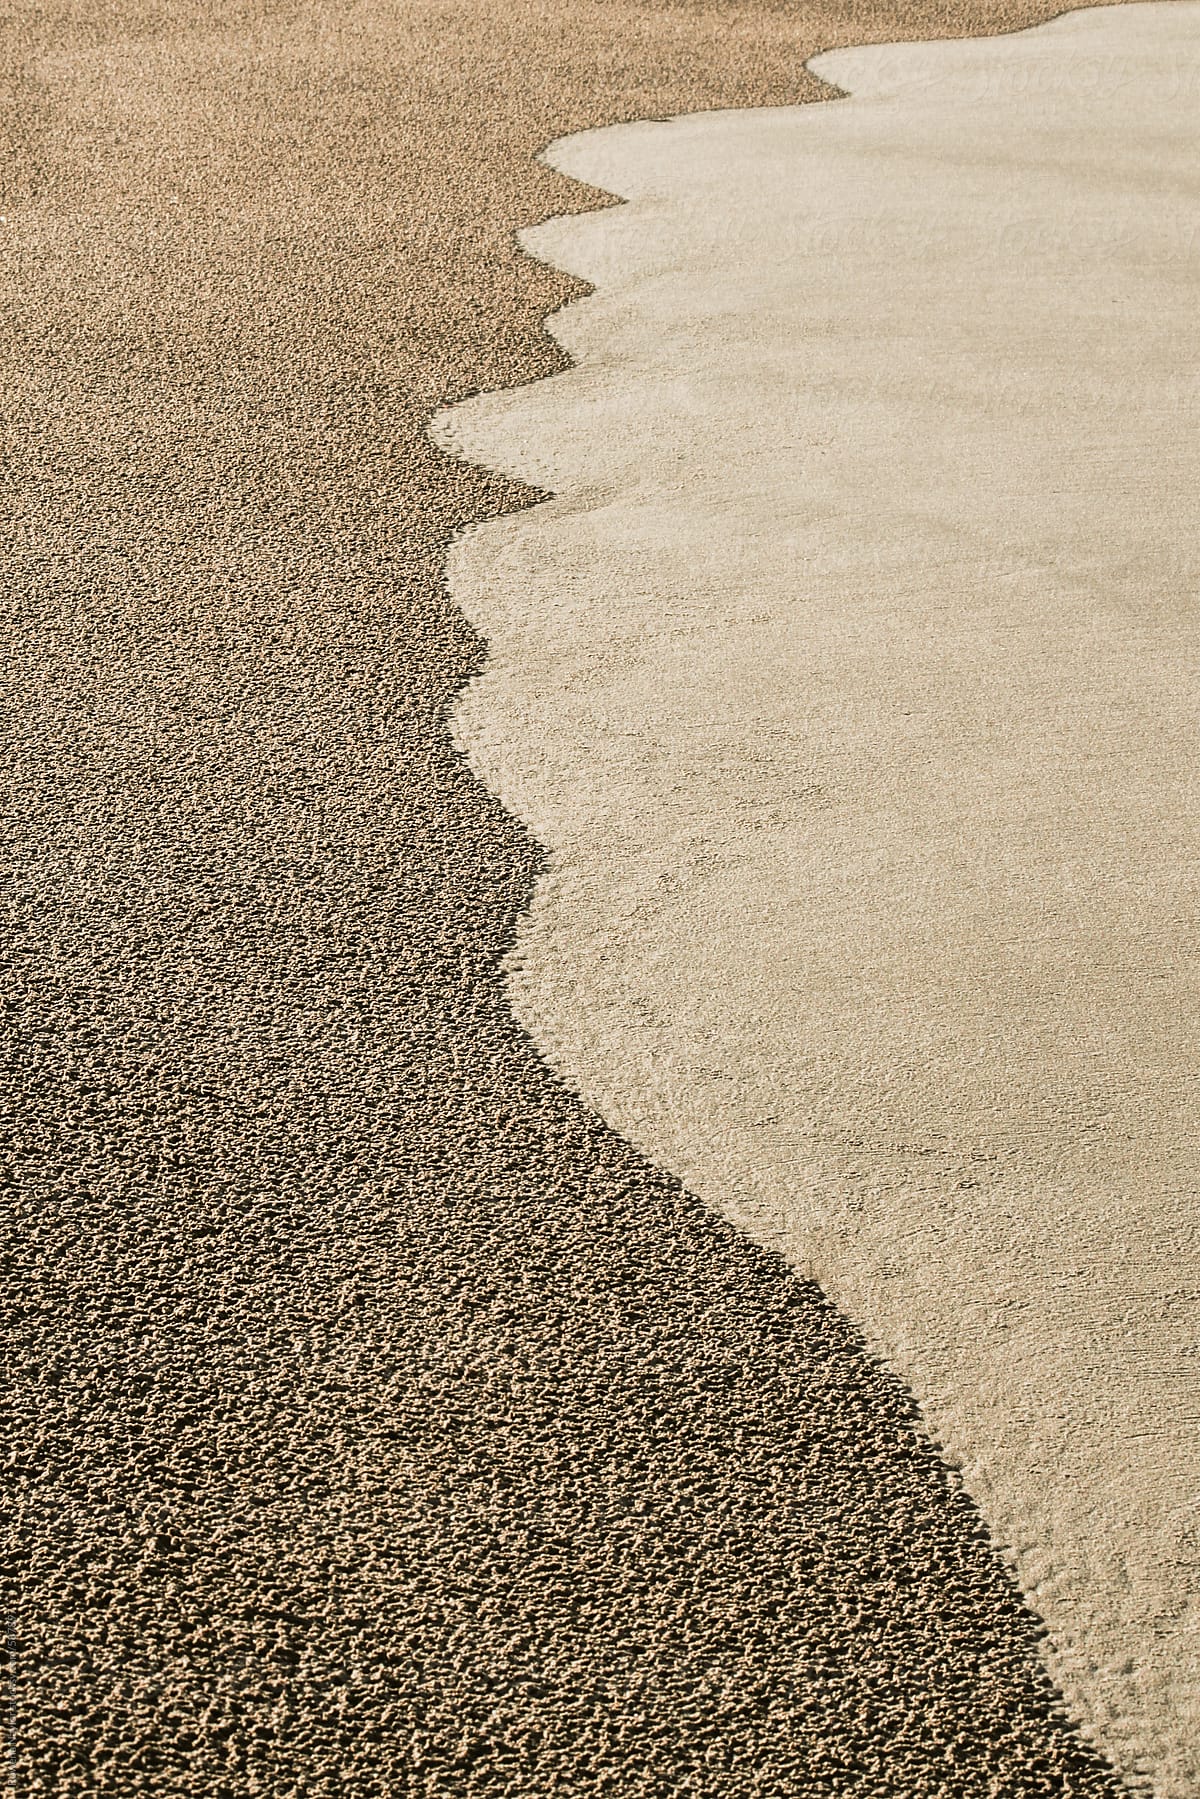 Abstract Background Image of Beach Sand